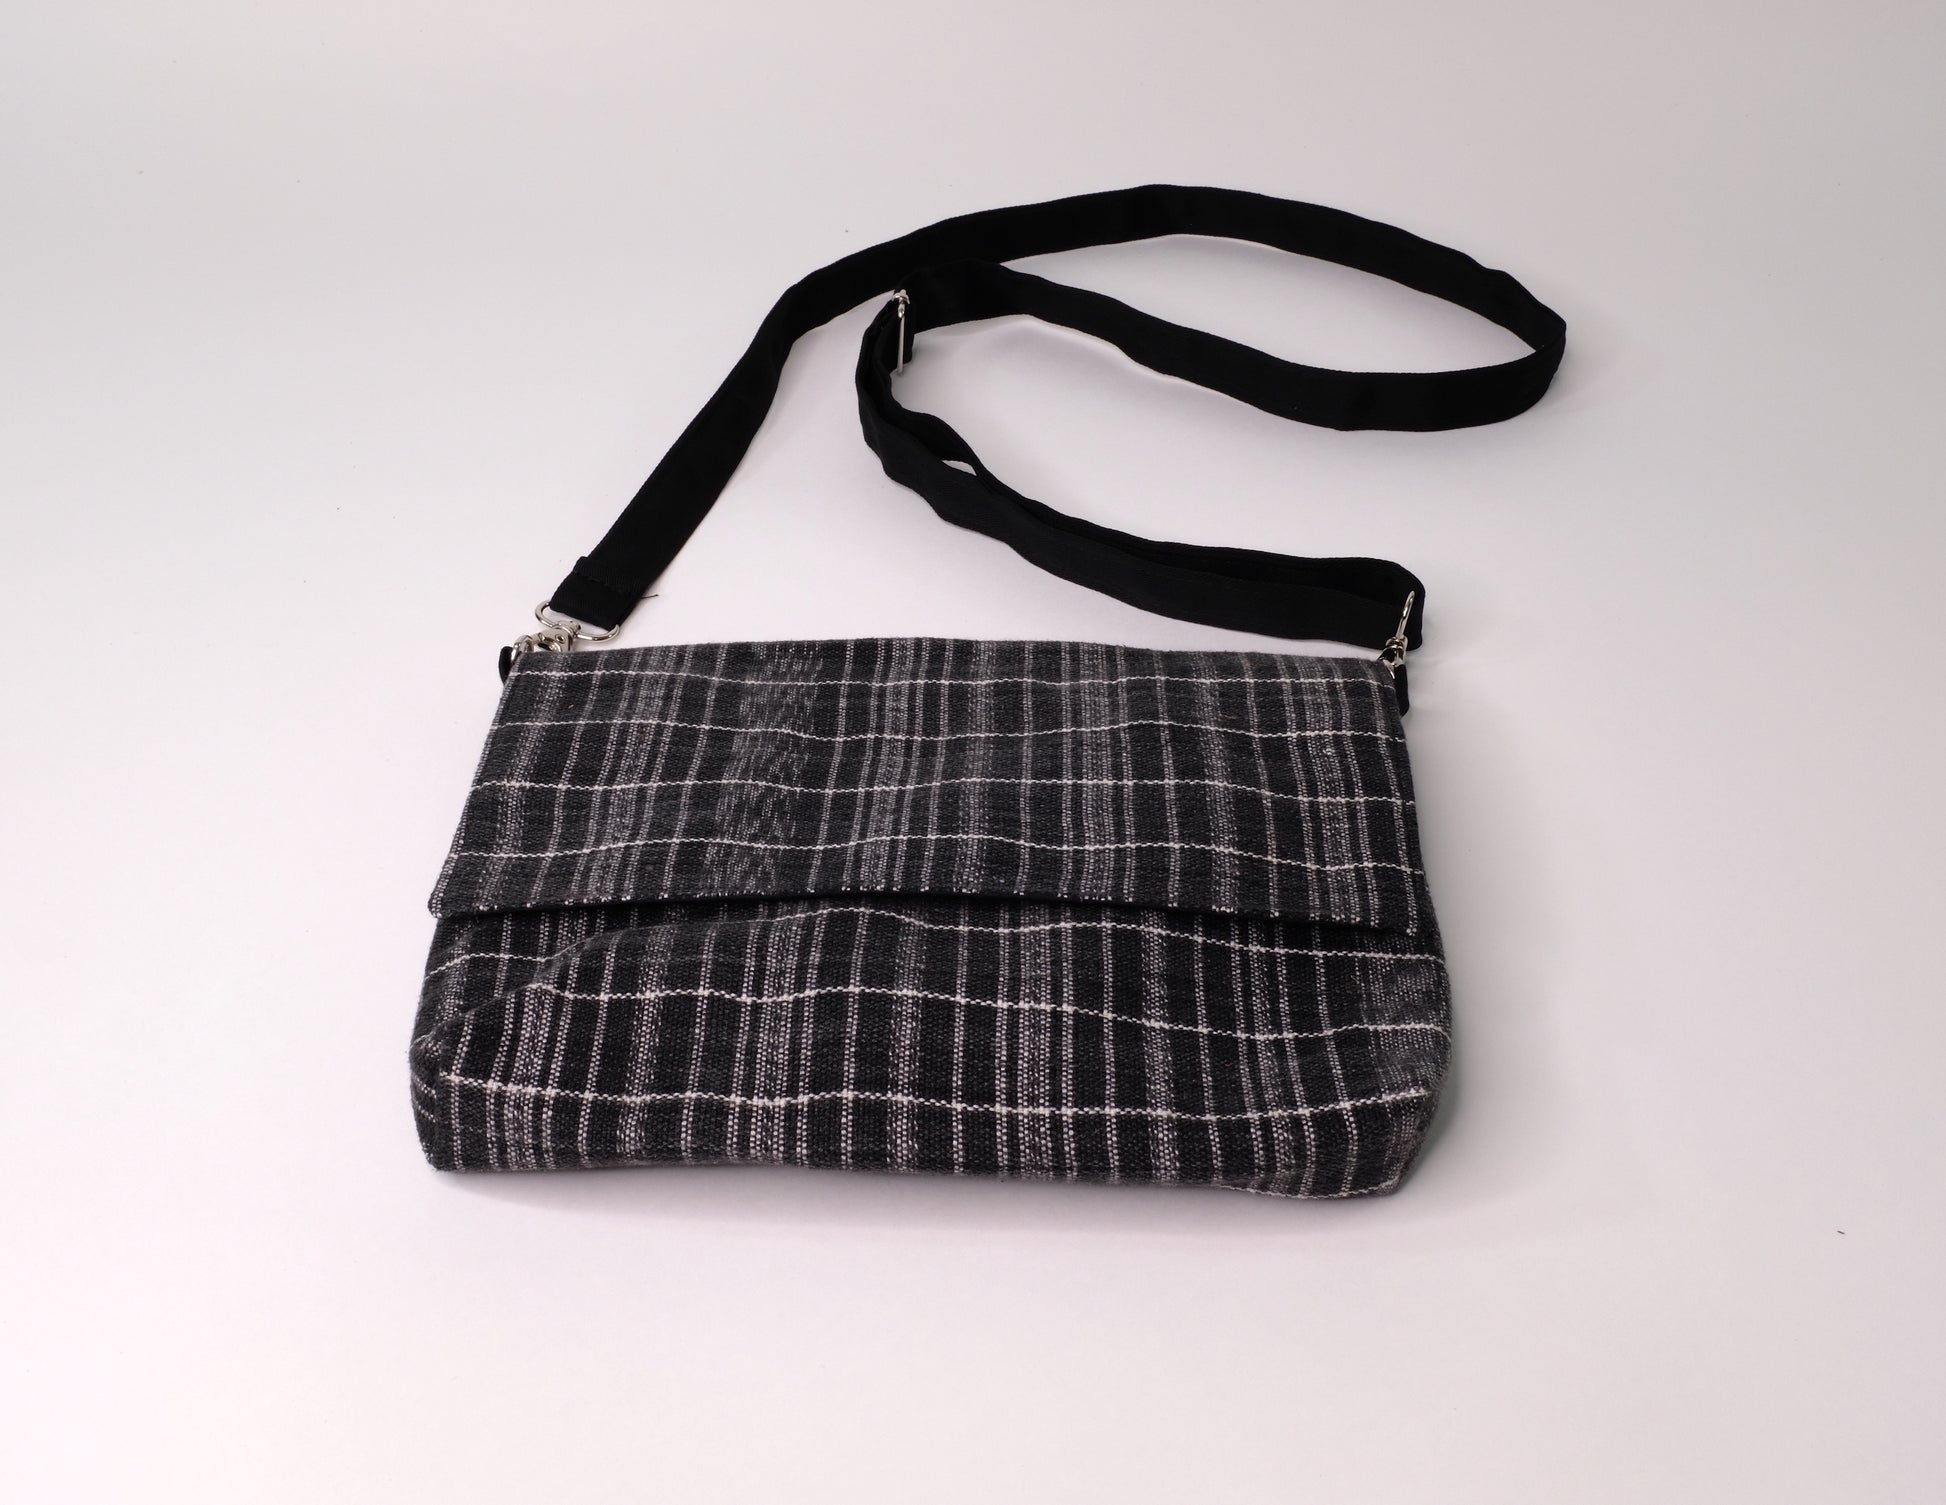 Crossbody bag constructed with carefully handwoven black ikat cotton textiles.